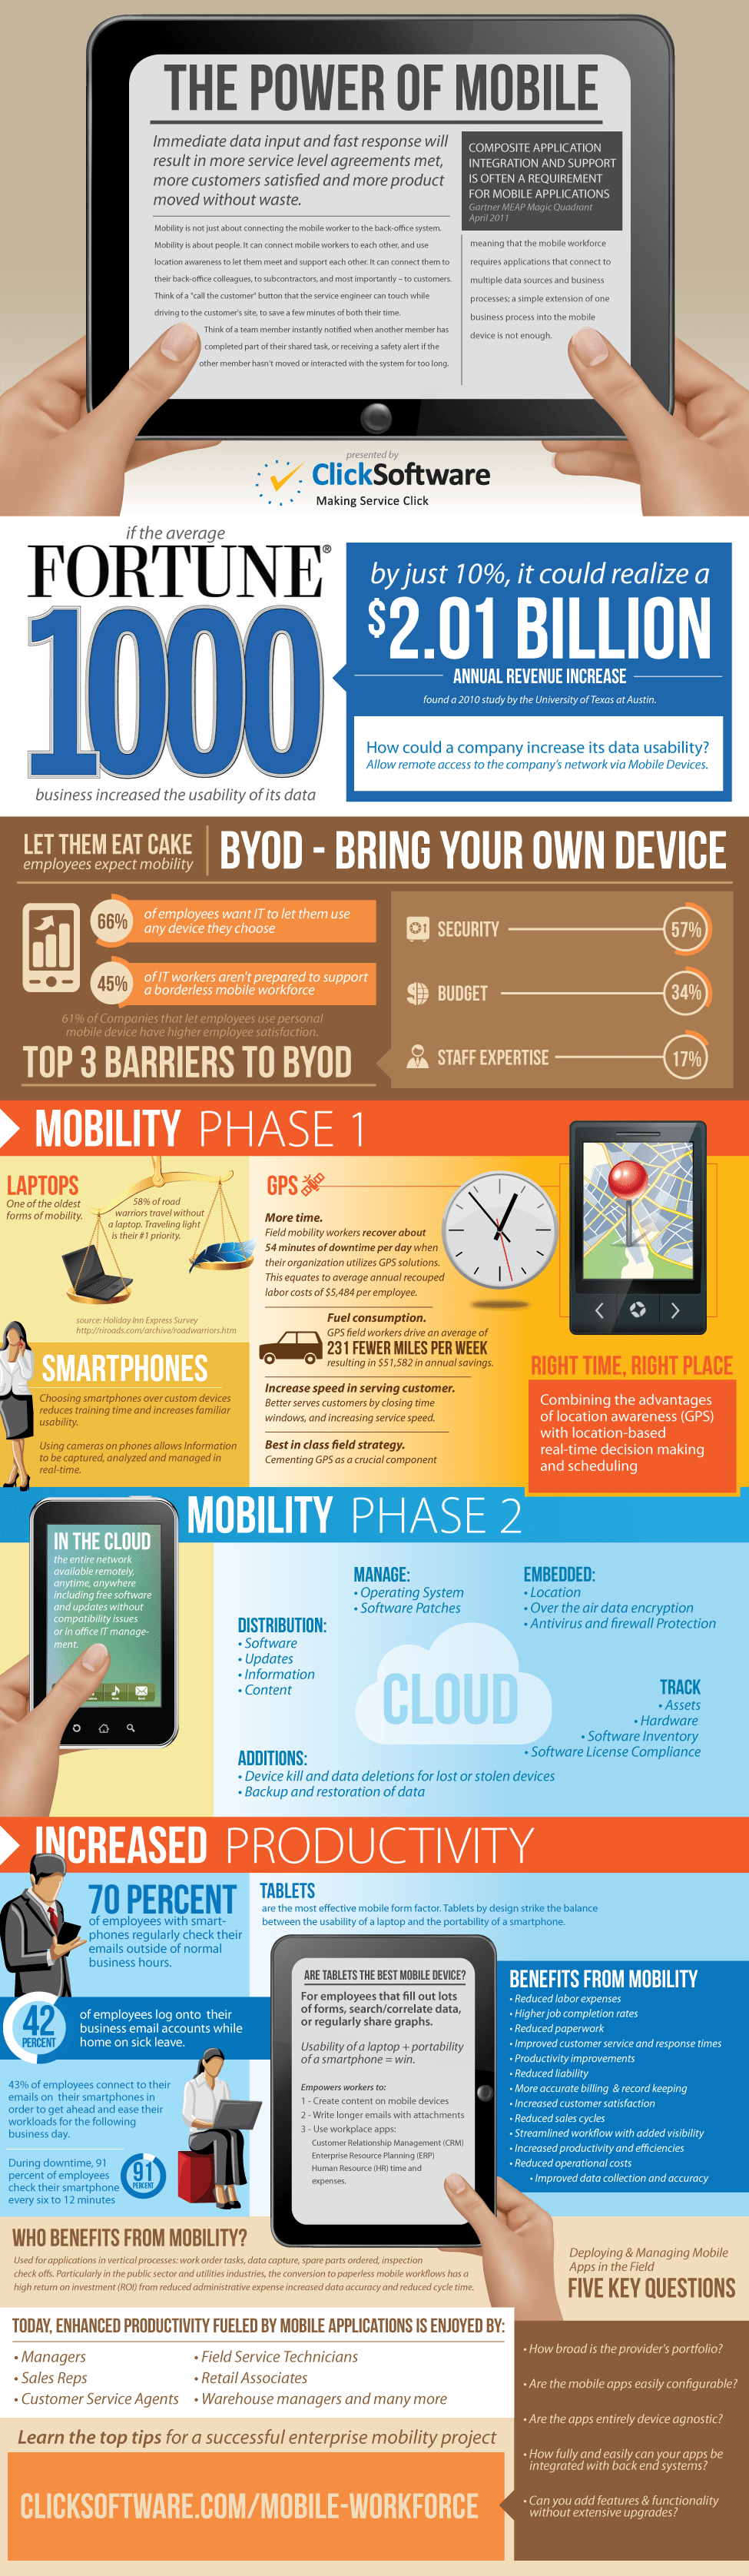 mobile device/byod infographic